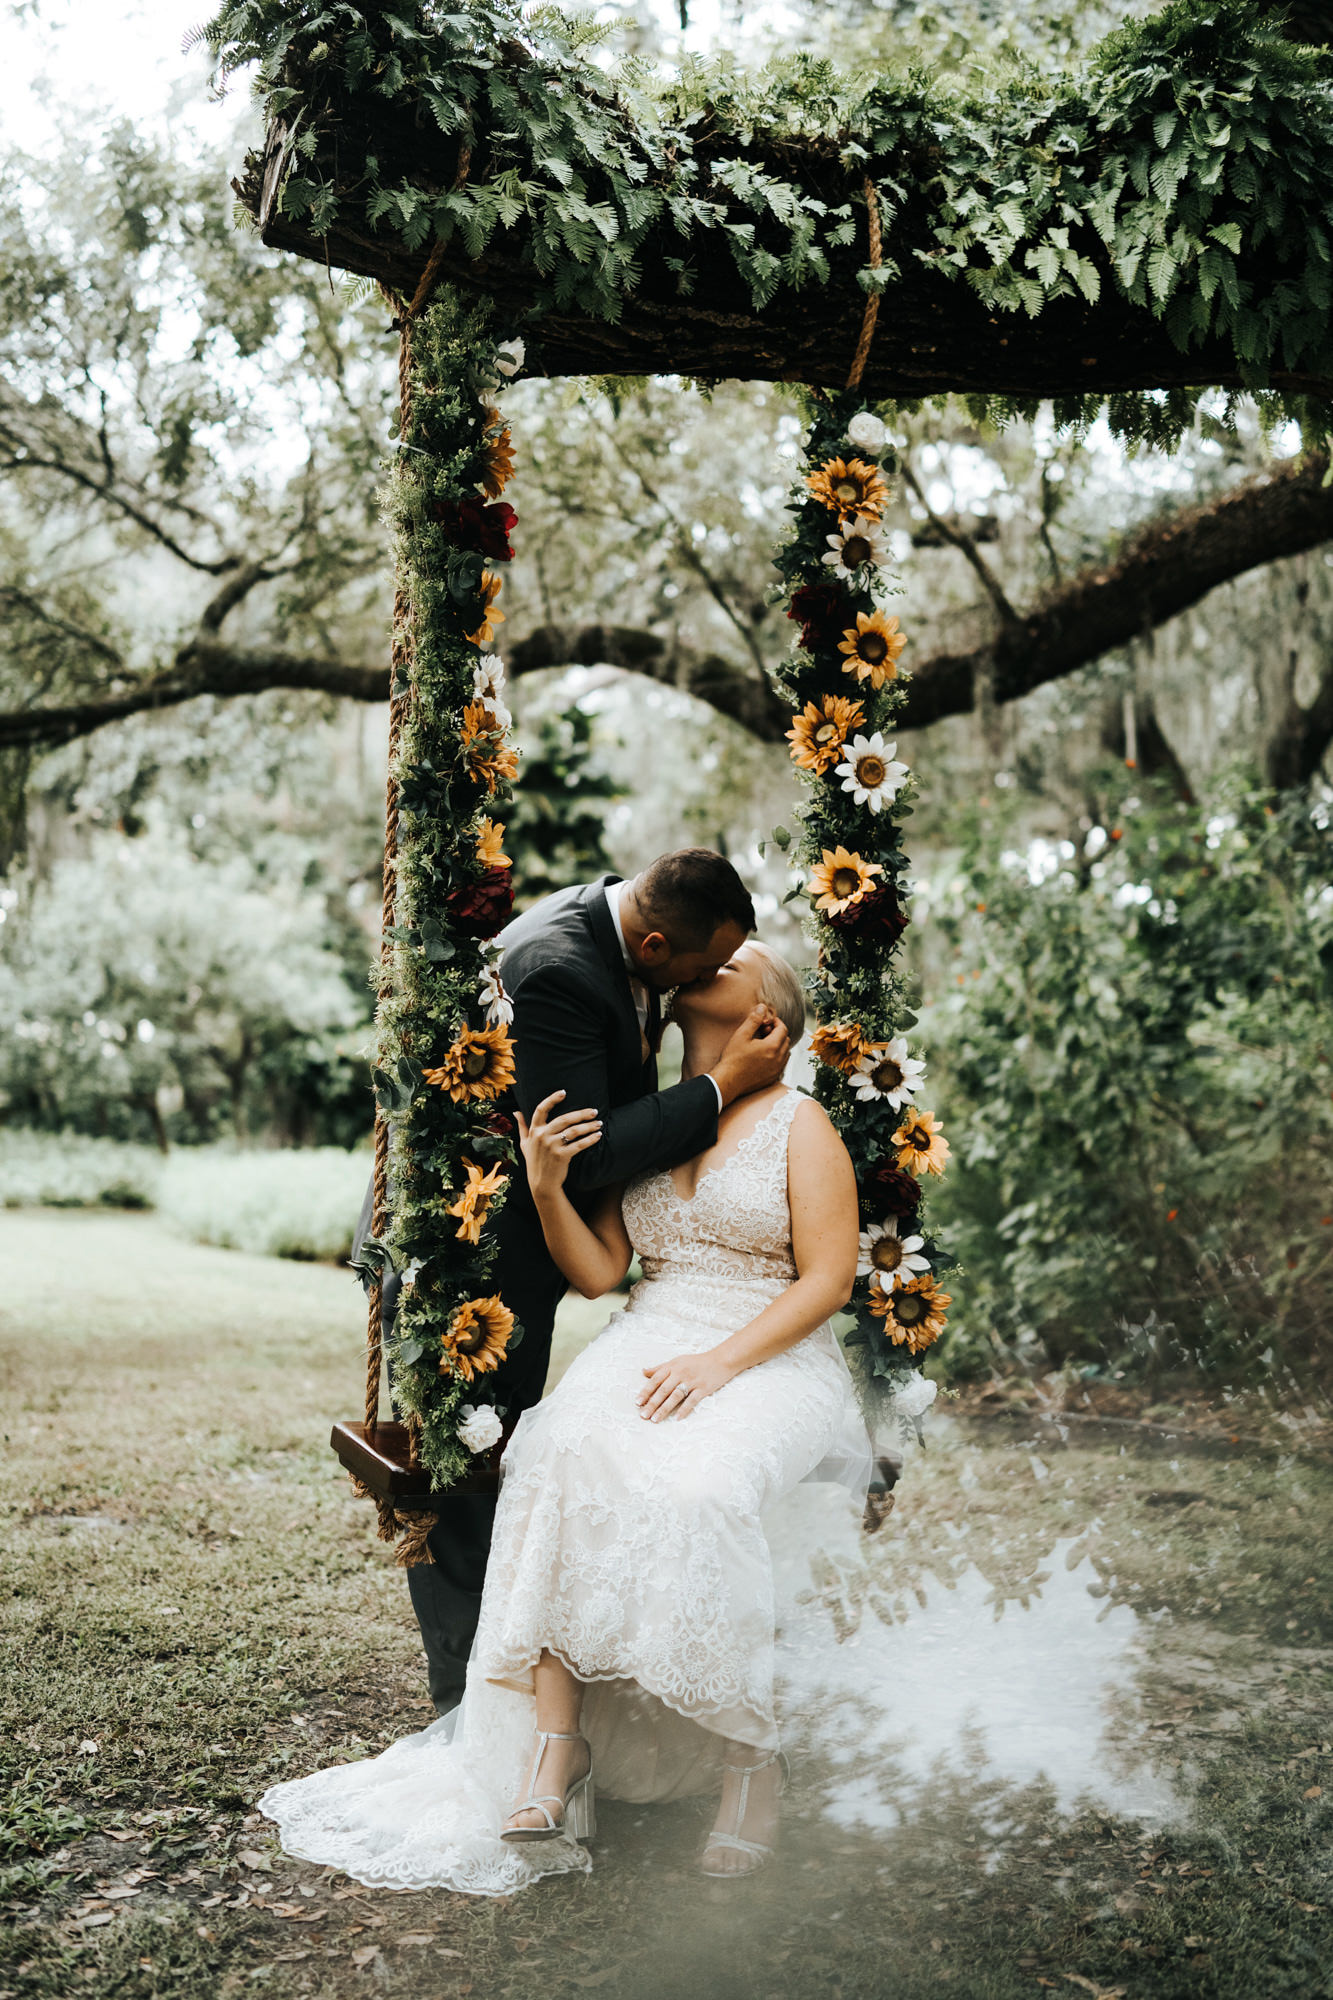 Bride and Groom Outdoor Portrait on Tree Swing with Greenery and Sunflowers | V Neck Champagne Lace Bridal Gown Wedding Dress from Sarasota Dress Shop Truly Forever Bridal | Groom in Classic Charcoal Grey Gray Suit Tux with Sunflower Boutonniere